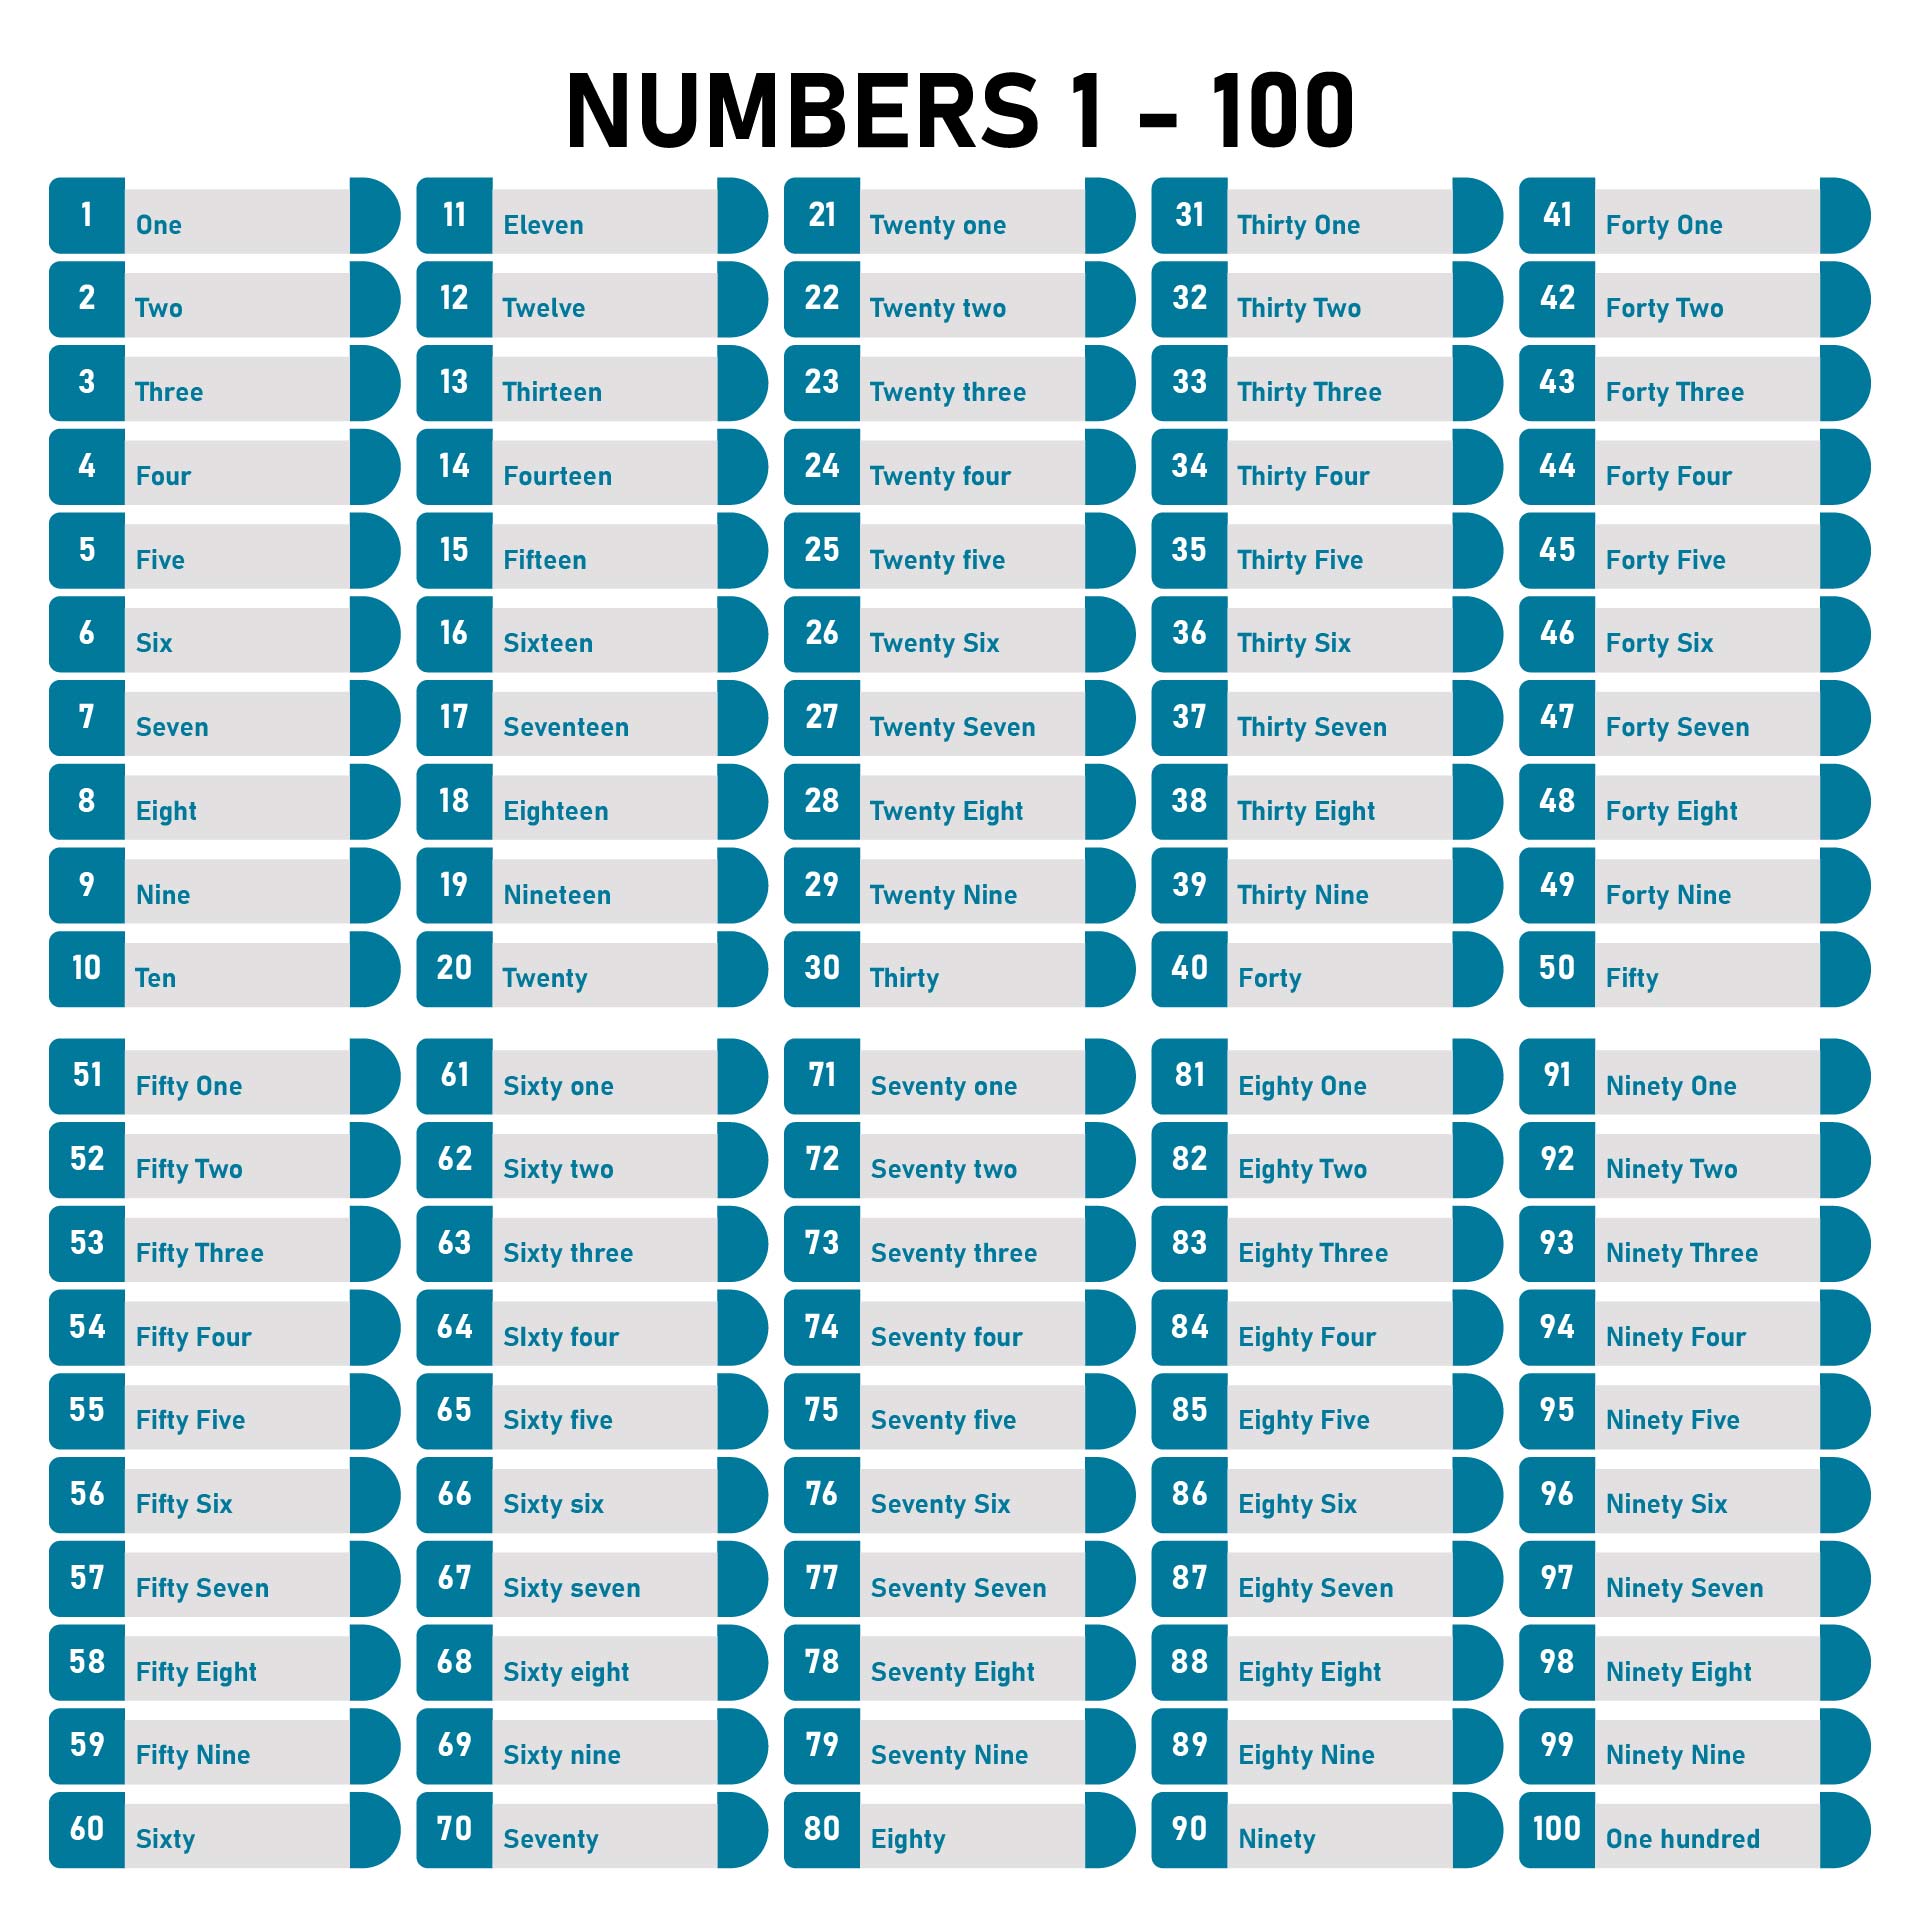 number-names-1-to-100-spelling-numbers-in-words-1-to-100-numbers-in